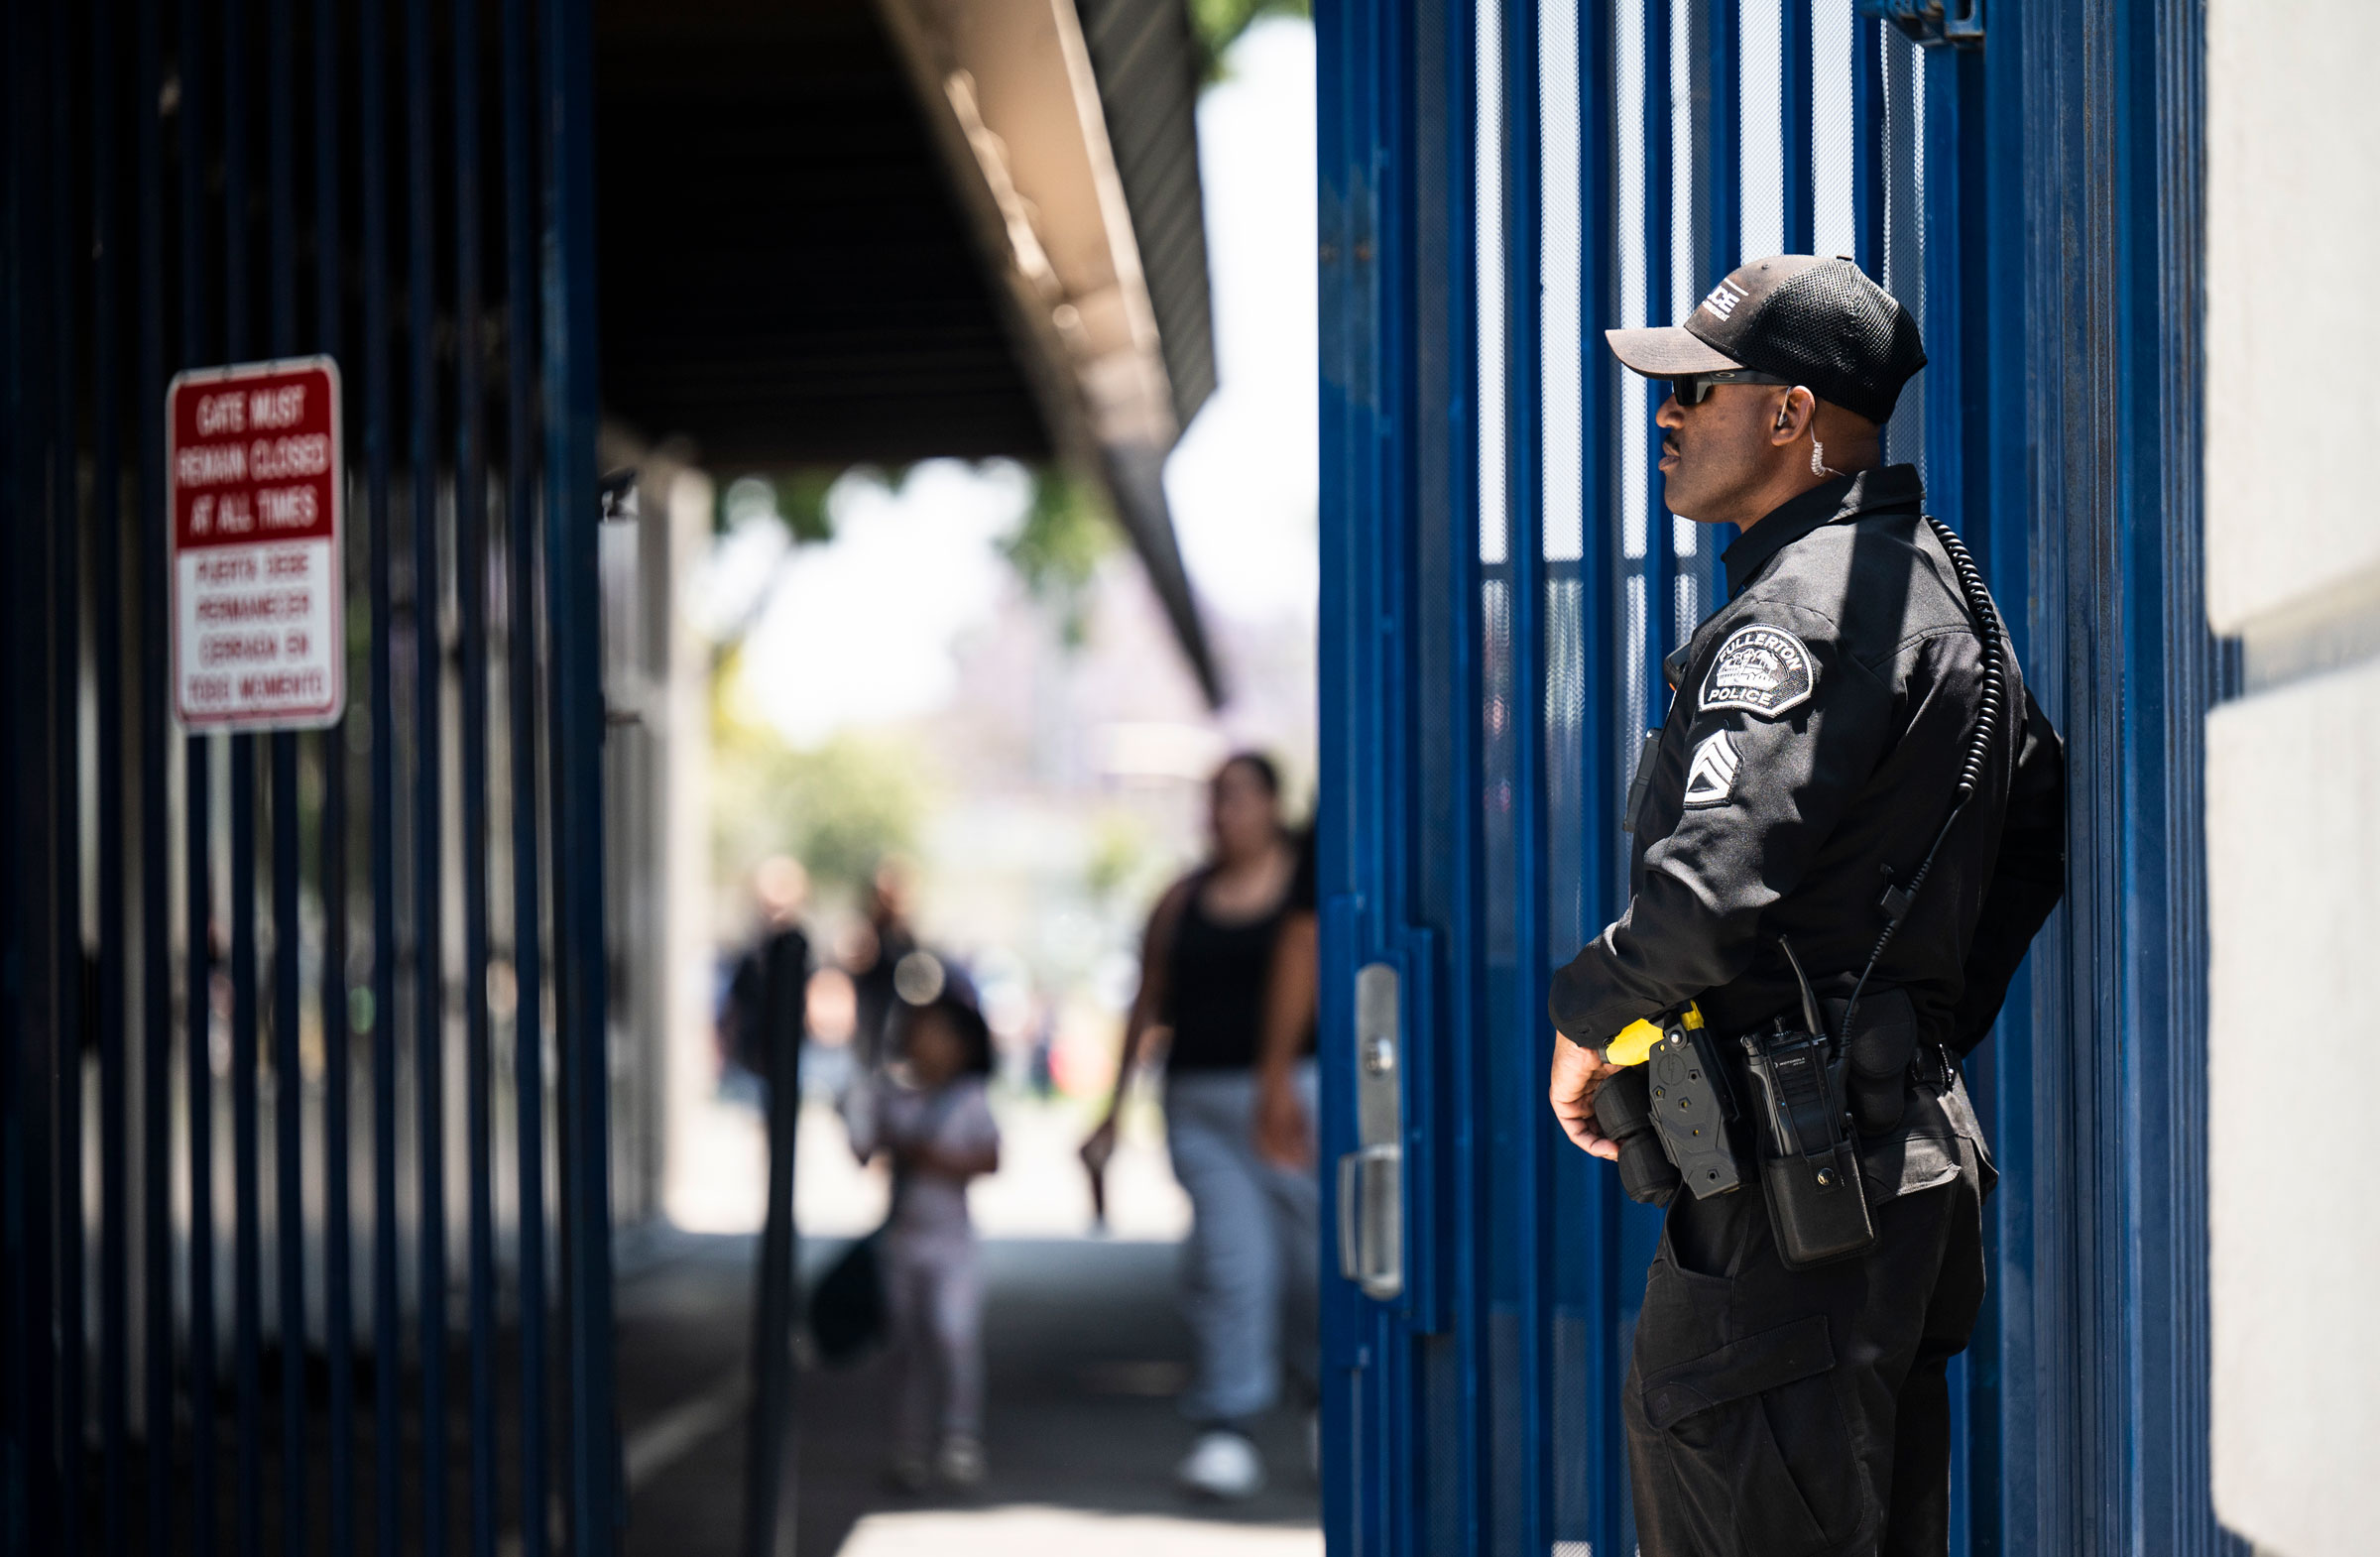 A Fullerton Police Department sergeant stands near the entrance to Richman Elementary School in Fullerton, Calif., on May 25, 2022. (Paul Bersebach—MediaNews Group/Orange County Register/Getty Images)